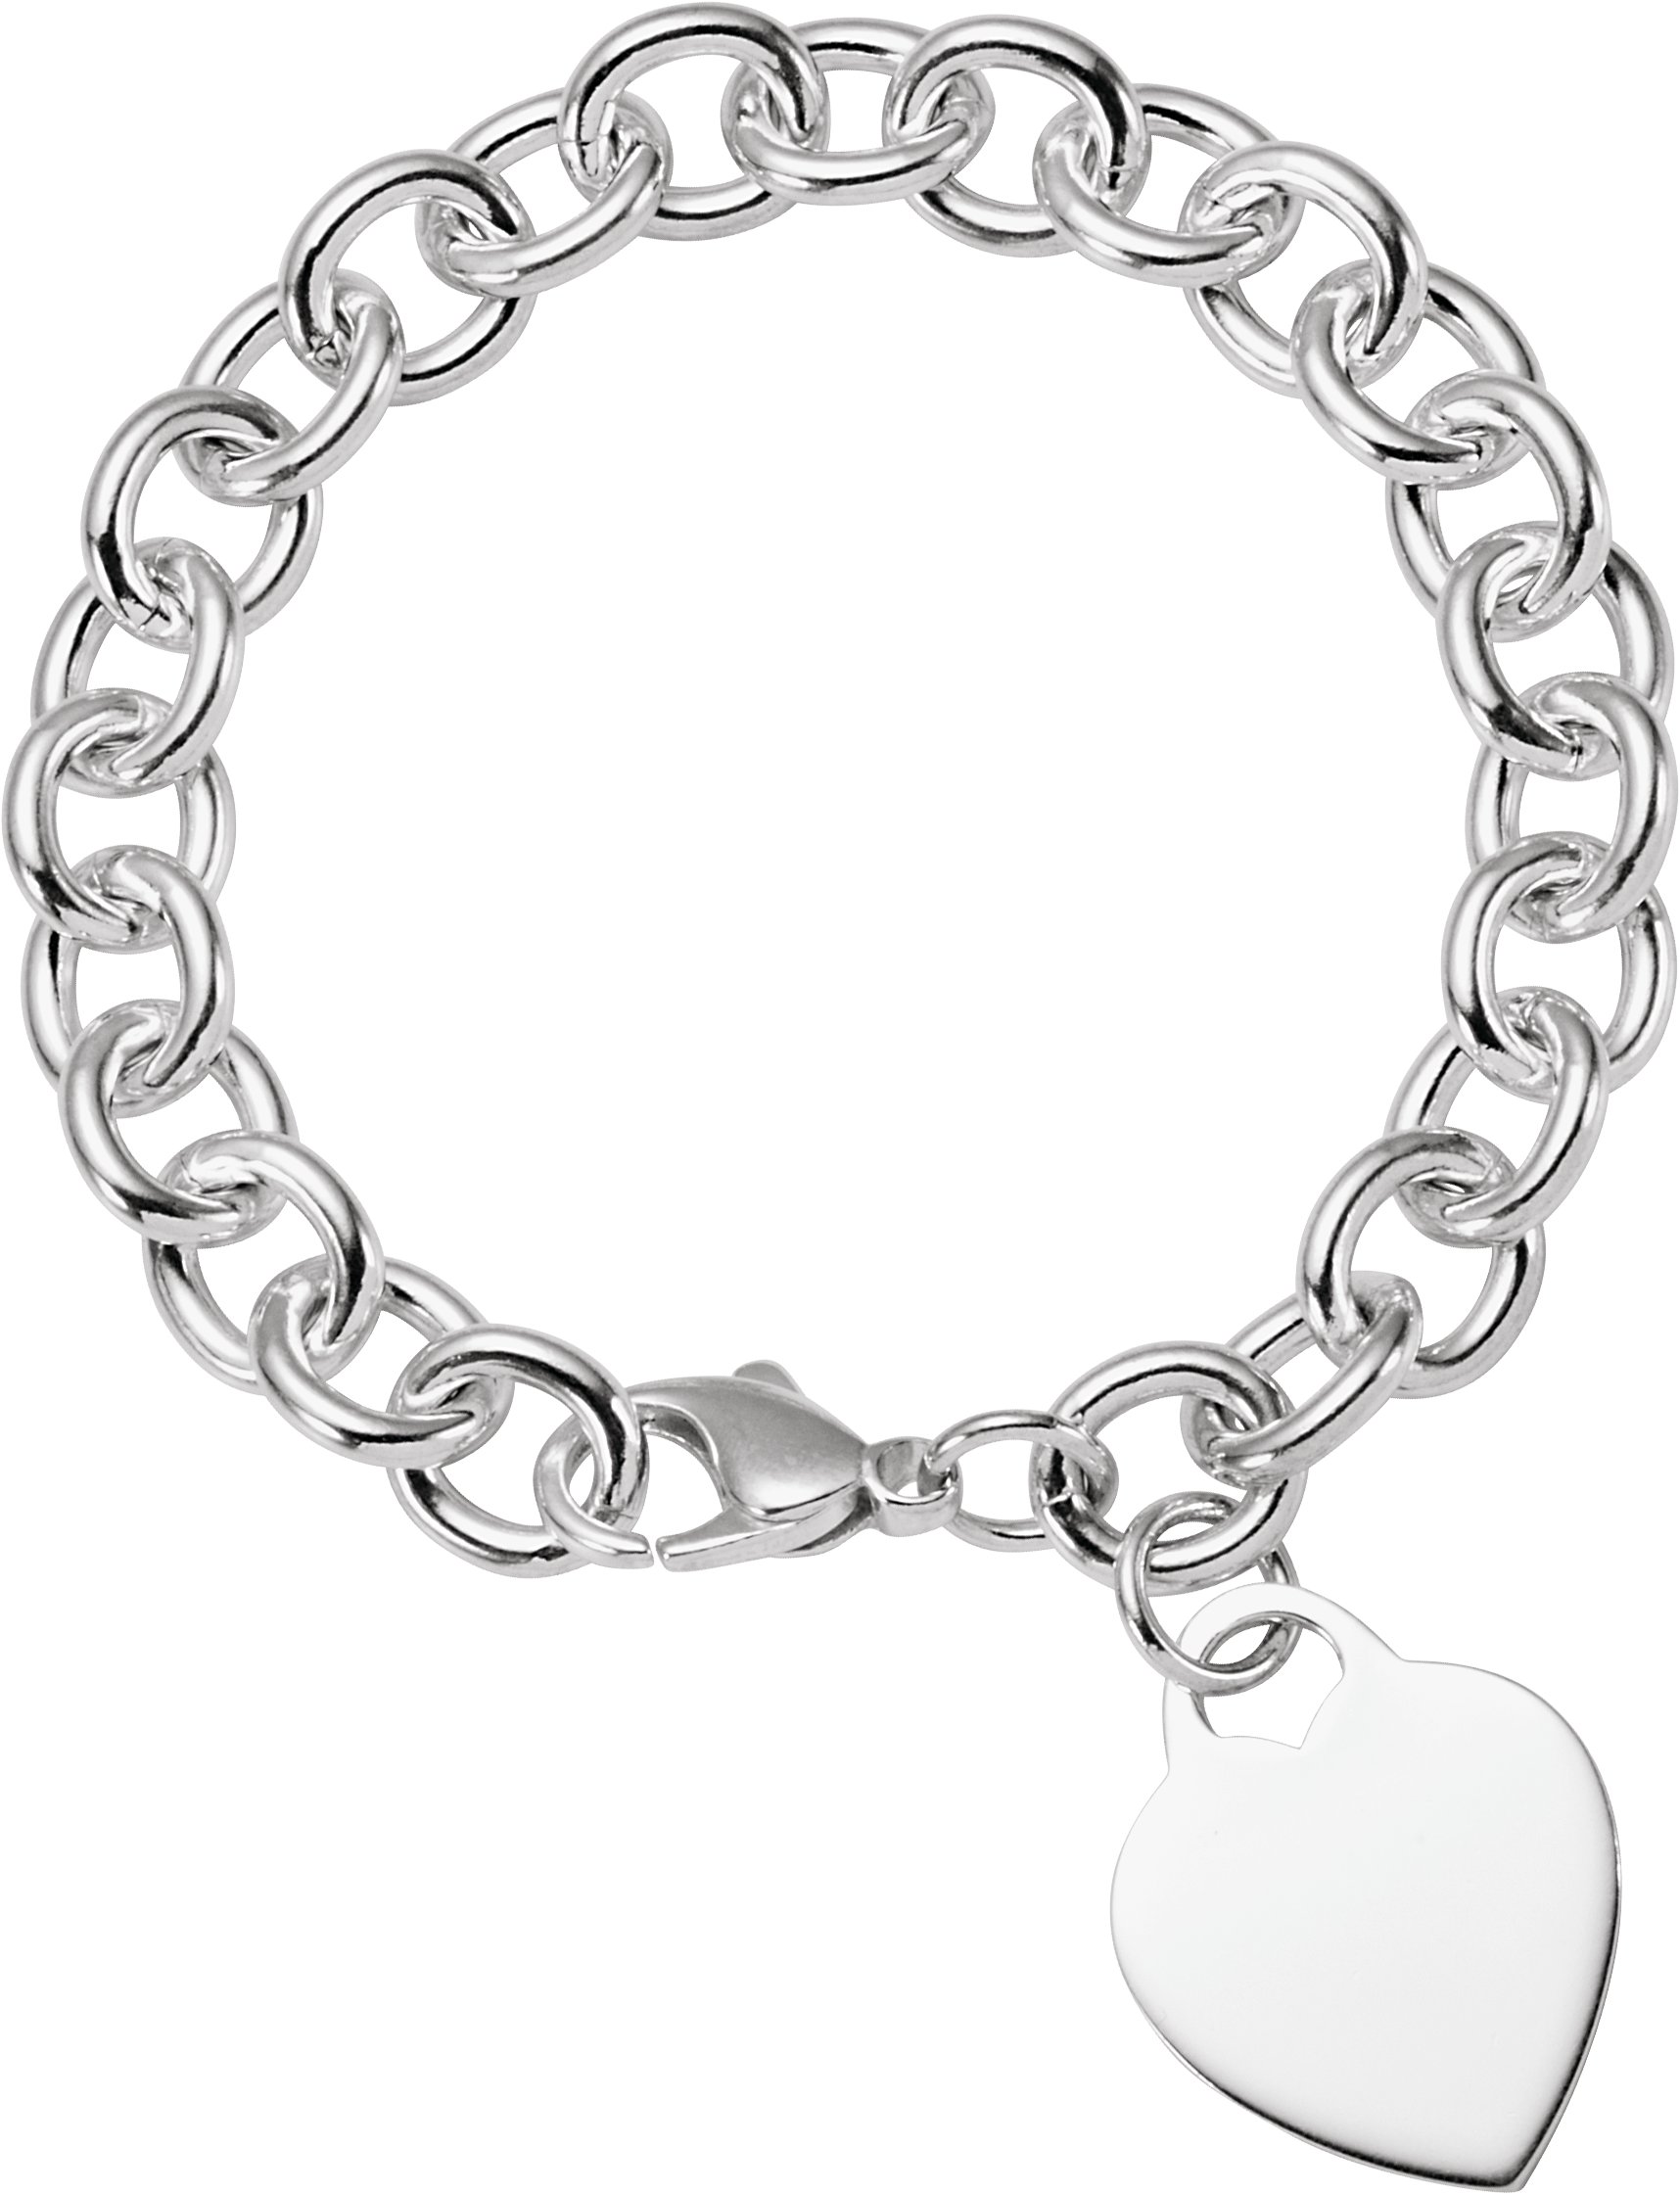 Sterling Silver Heart Charm 7 1/2" Chain